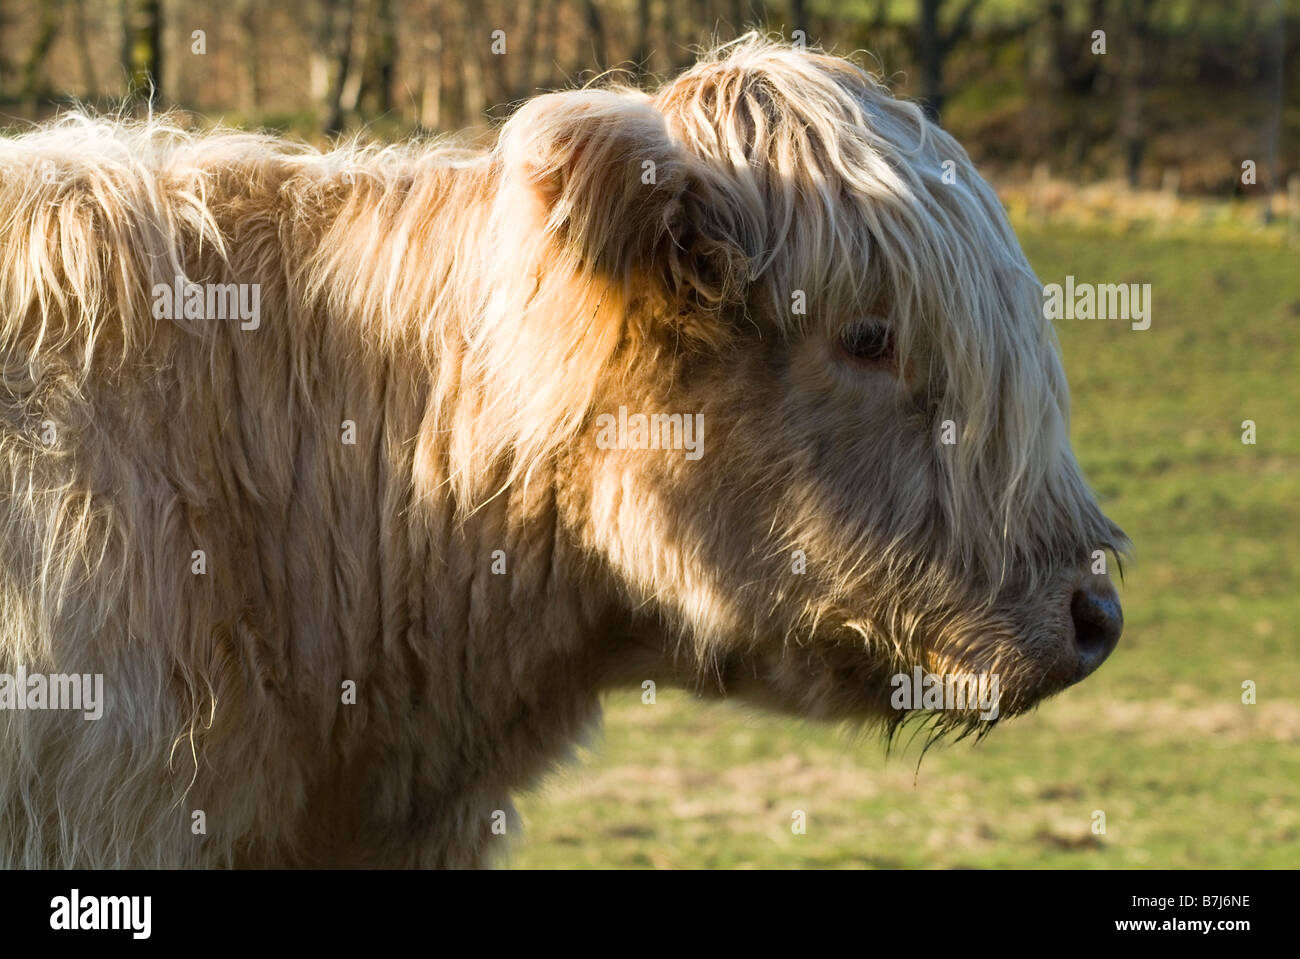 dh Highland cow COW UK Shaggy haired Highland cow hornless close up face scottish hairy head profile animal scotland Stock Photo